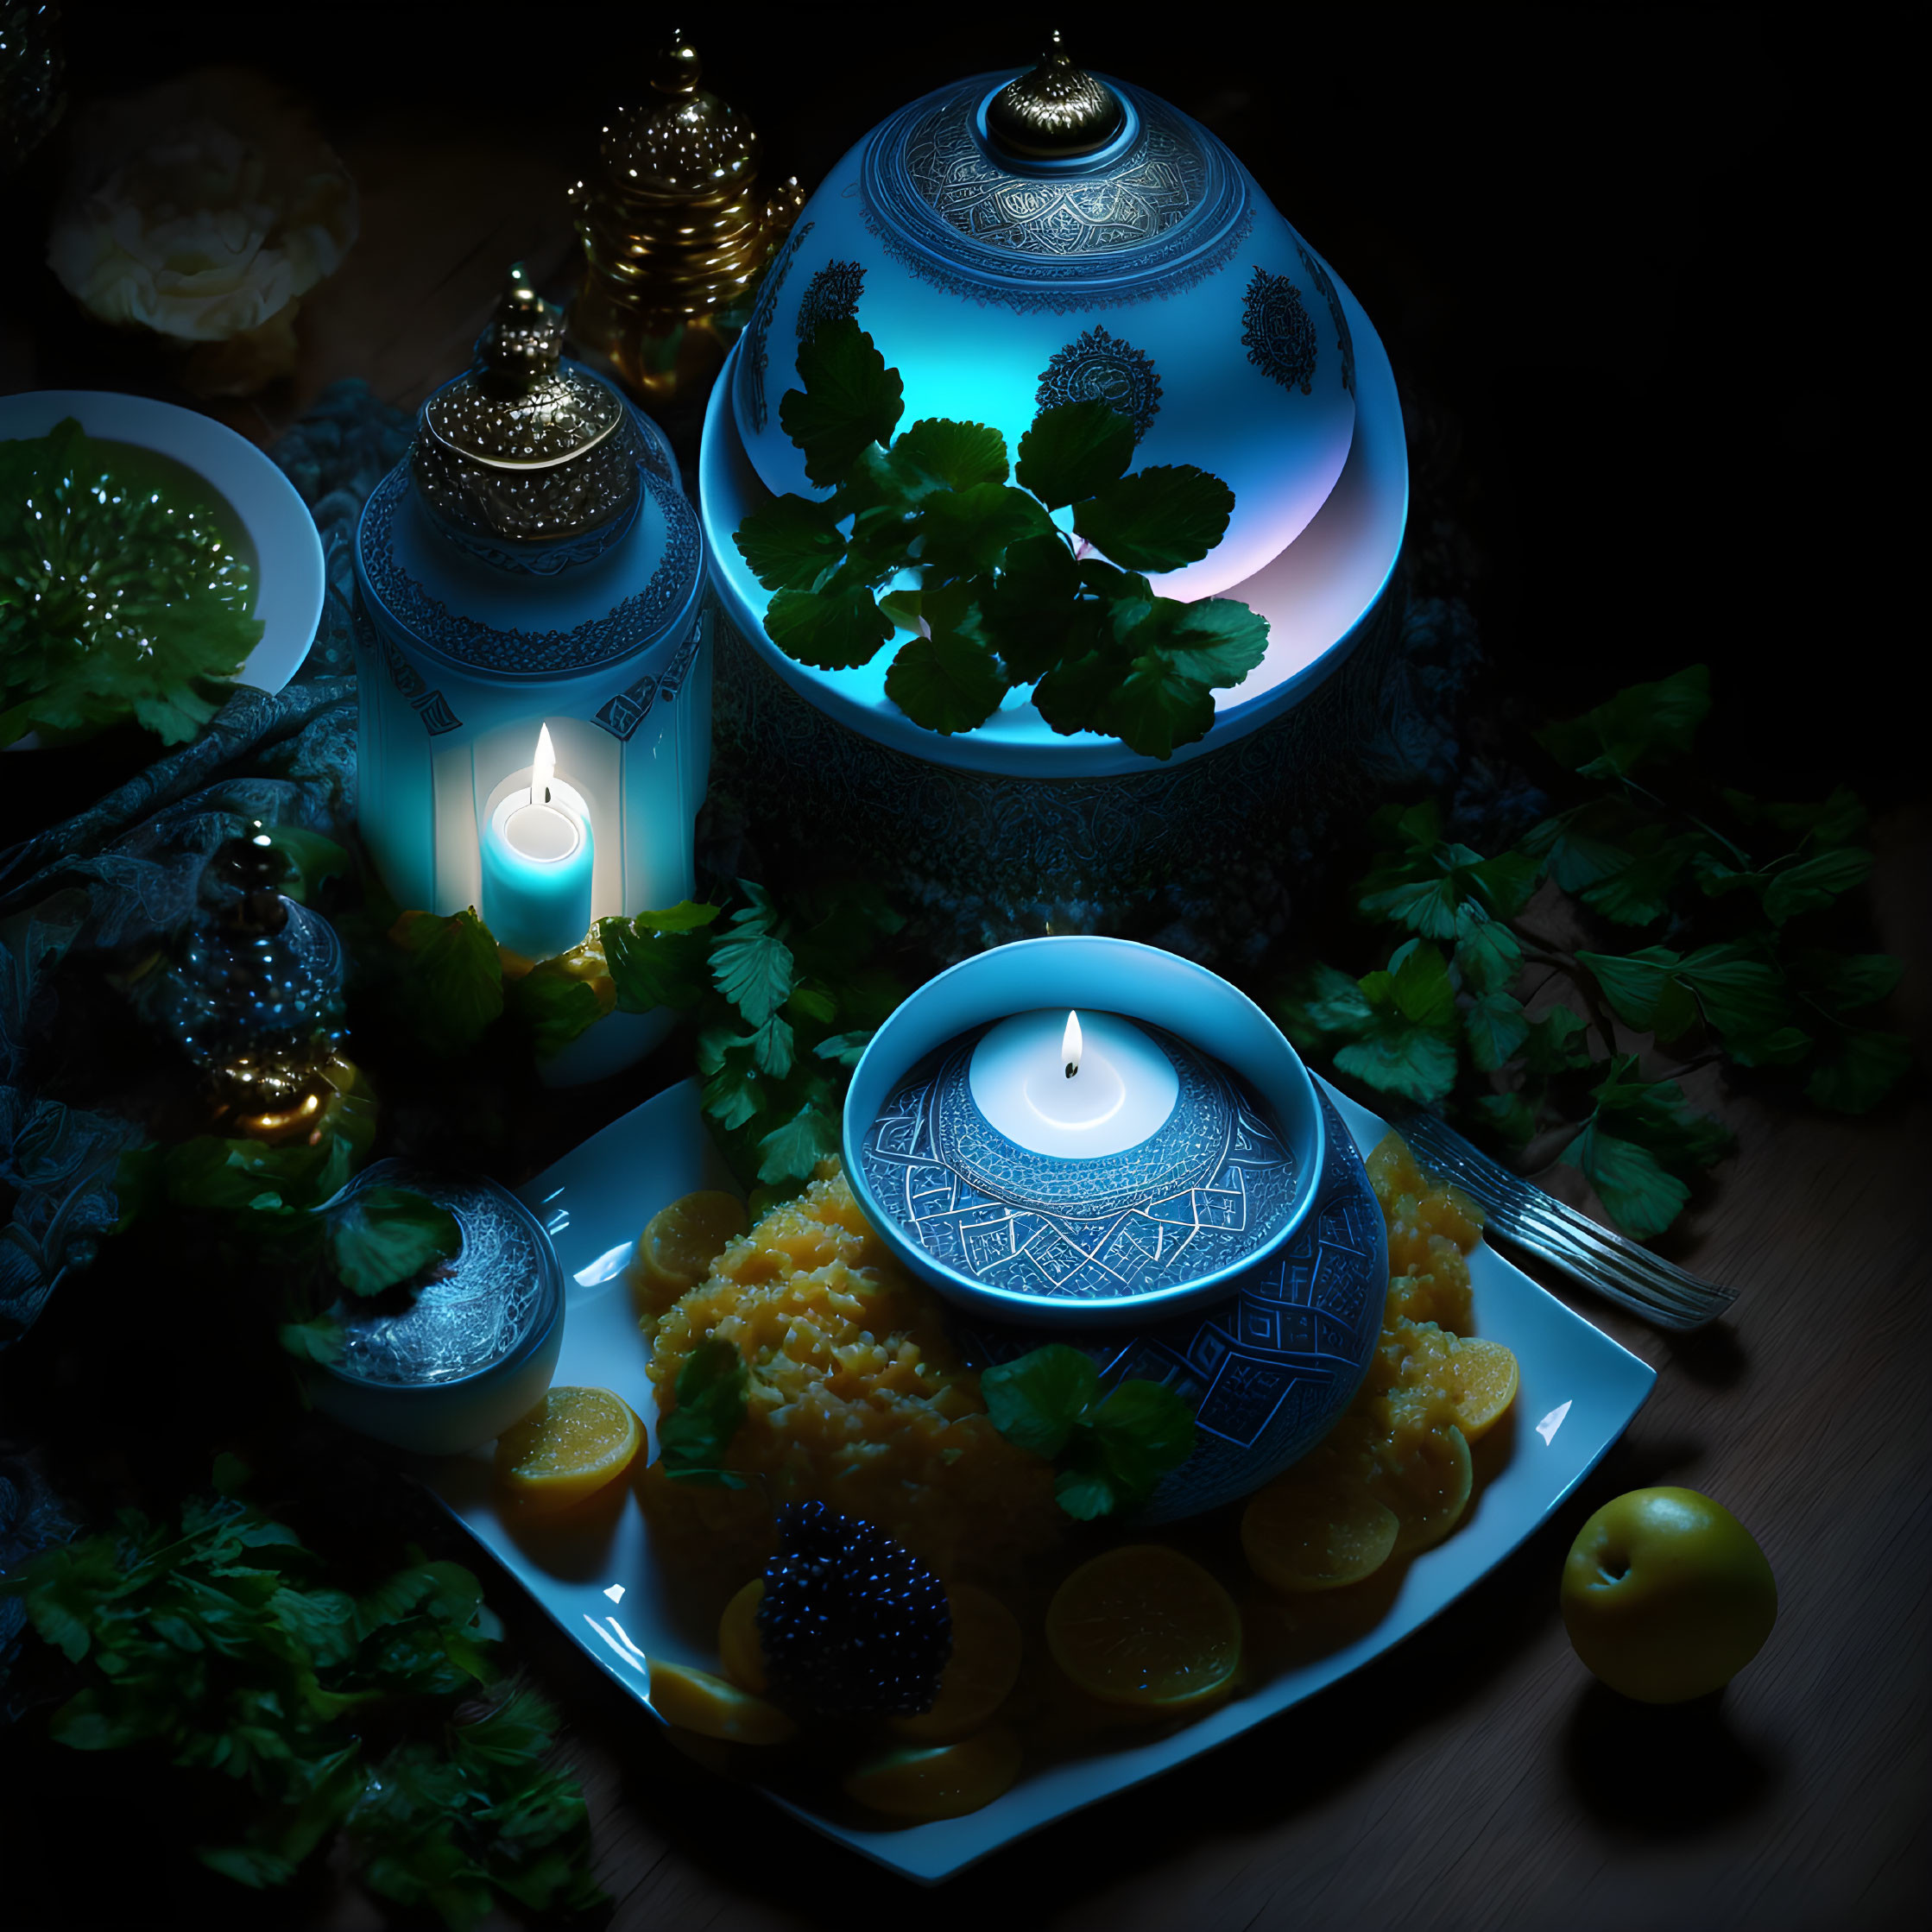 Traditional tagine, candles, plates, and citrus fruits in dimly lit setting